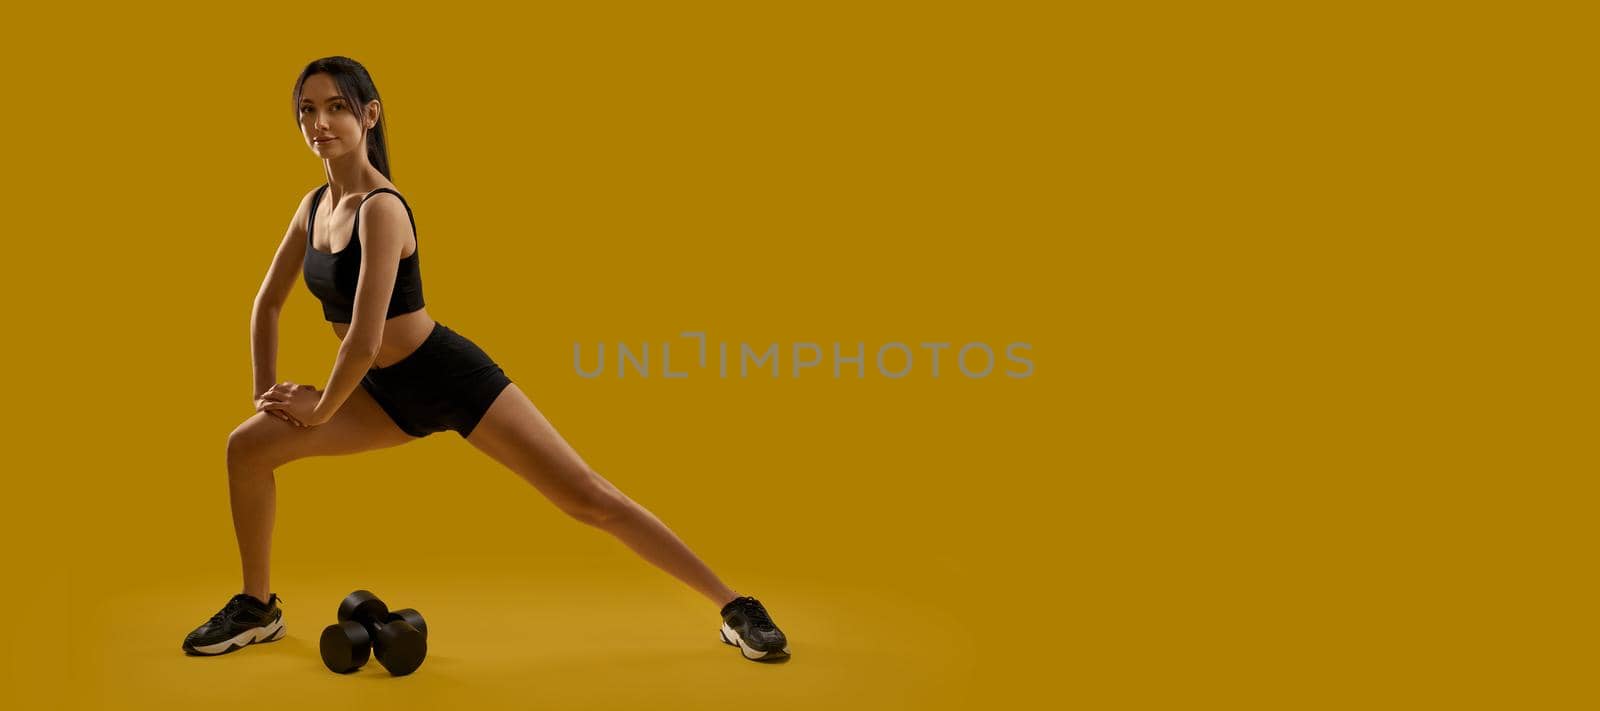 Side view of pretty slim young female working out indoors. Girl with ponytail wearing black top and shorts, stretching, making step, dumbbells on floor. Concept of youth.